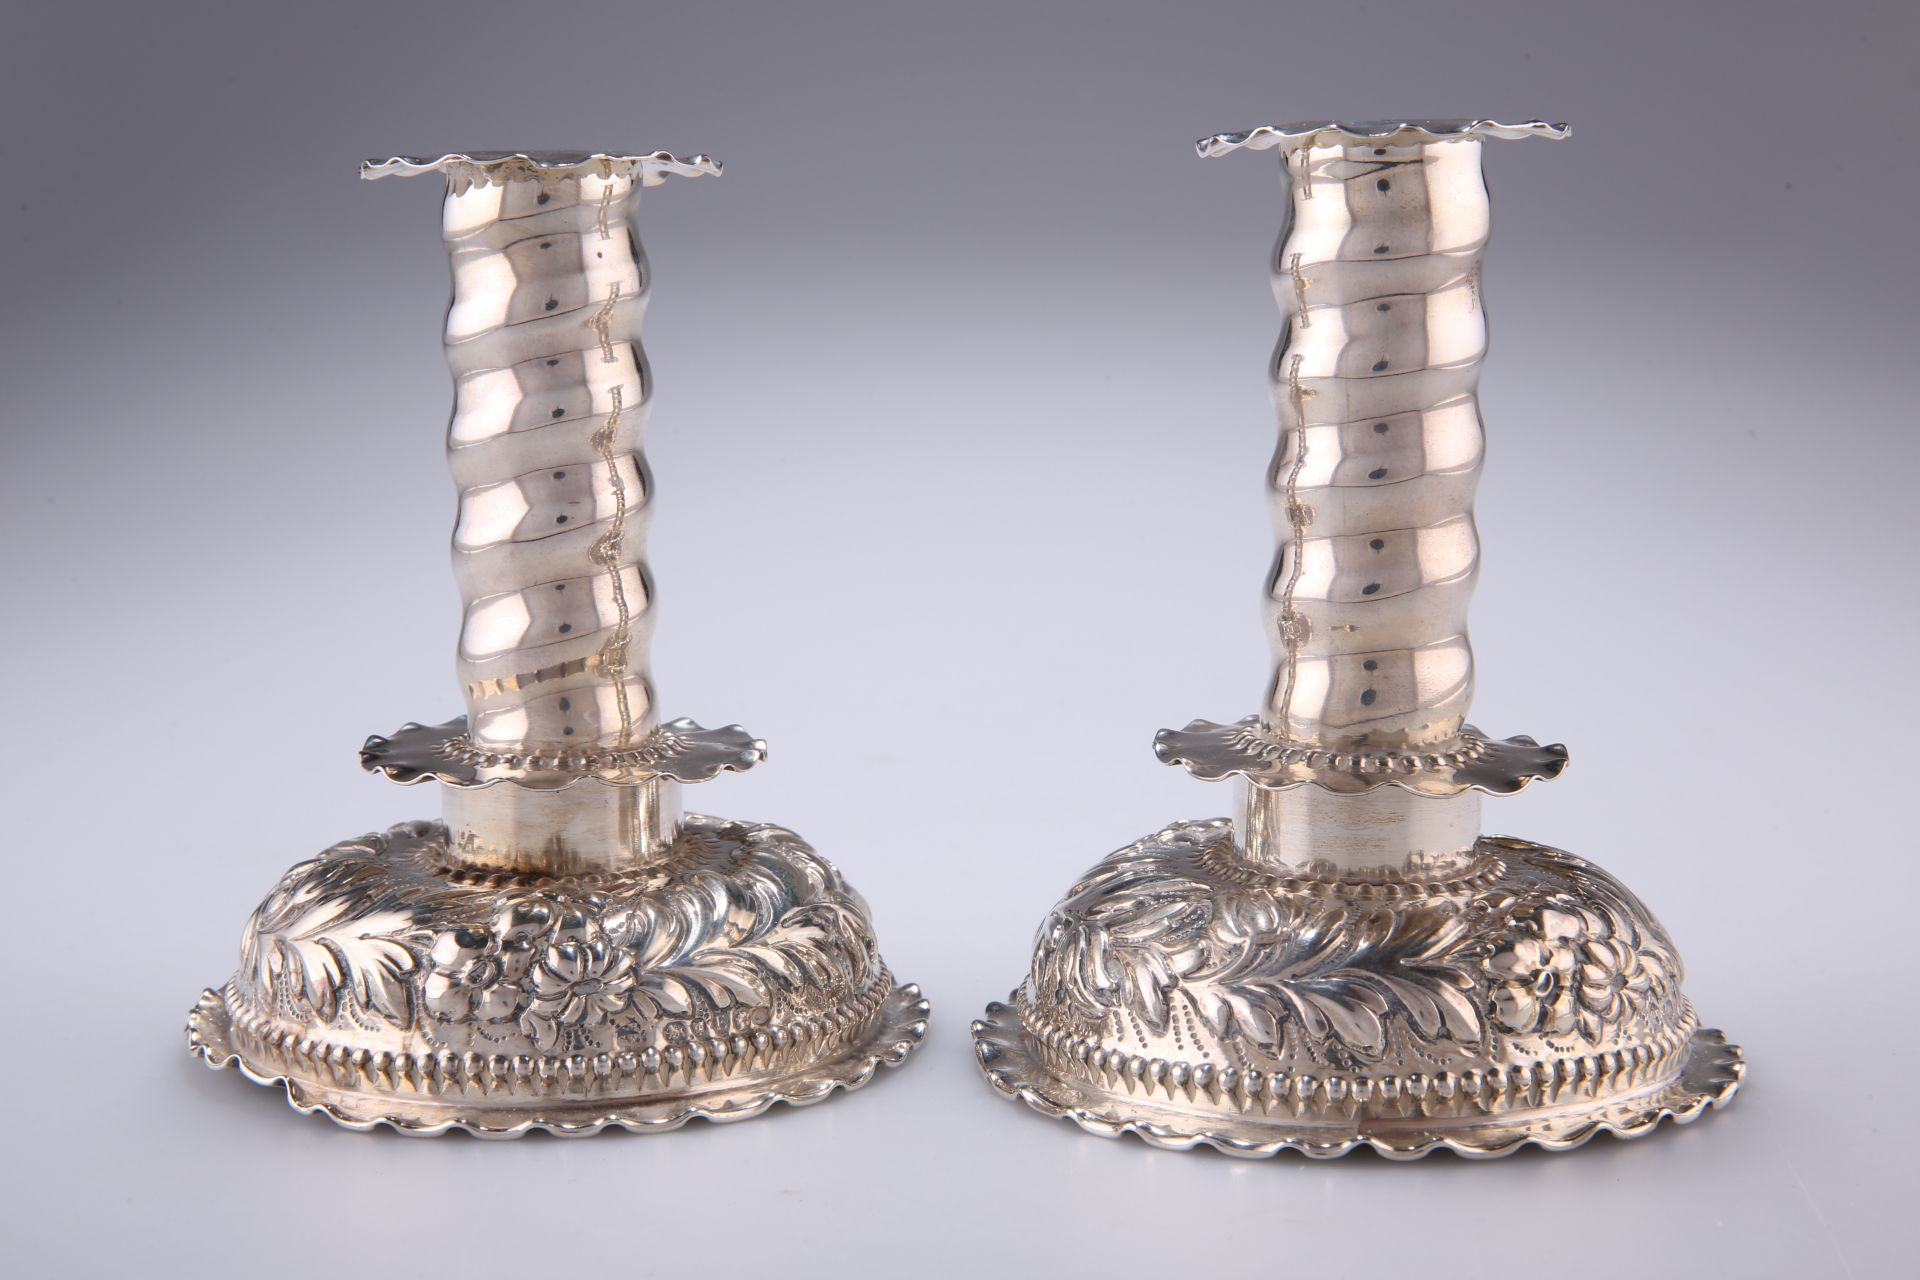 A PAIR OF VICTORIAN CHASED CANDLESTICKS, by George Fox, London 1880, each with removable drip tray